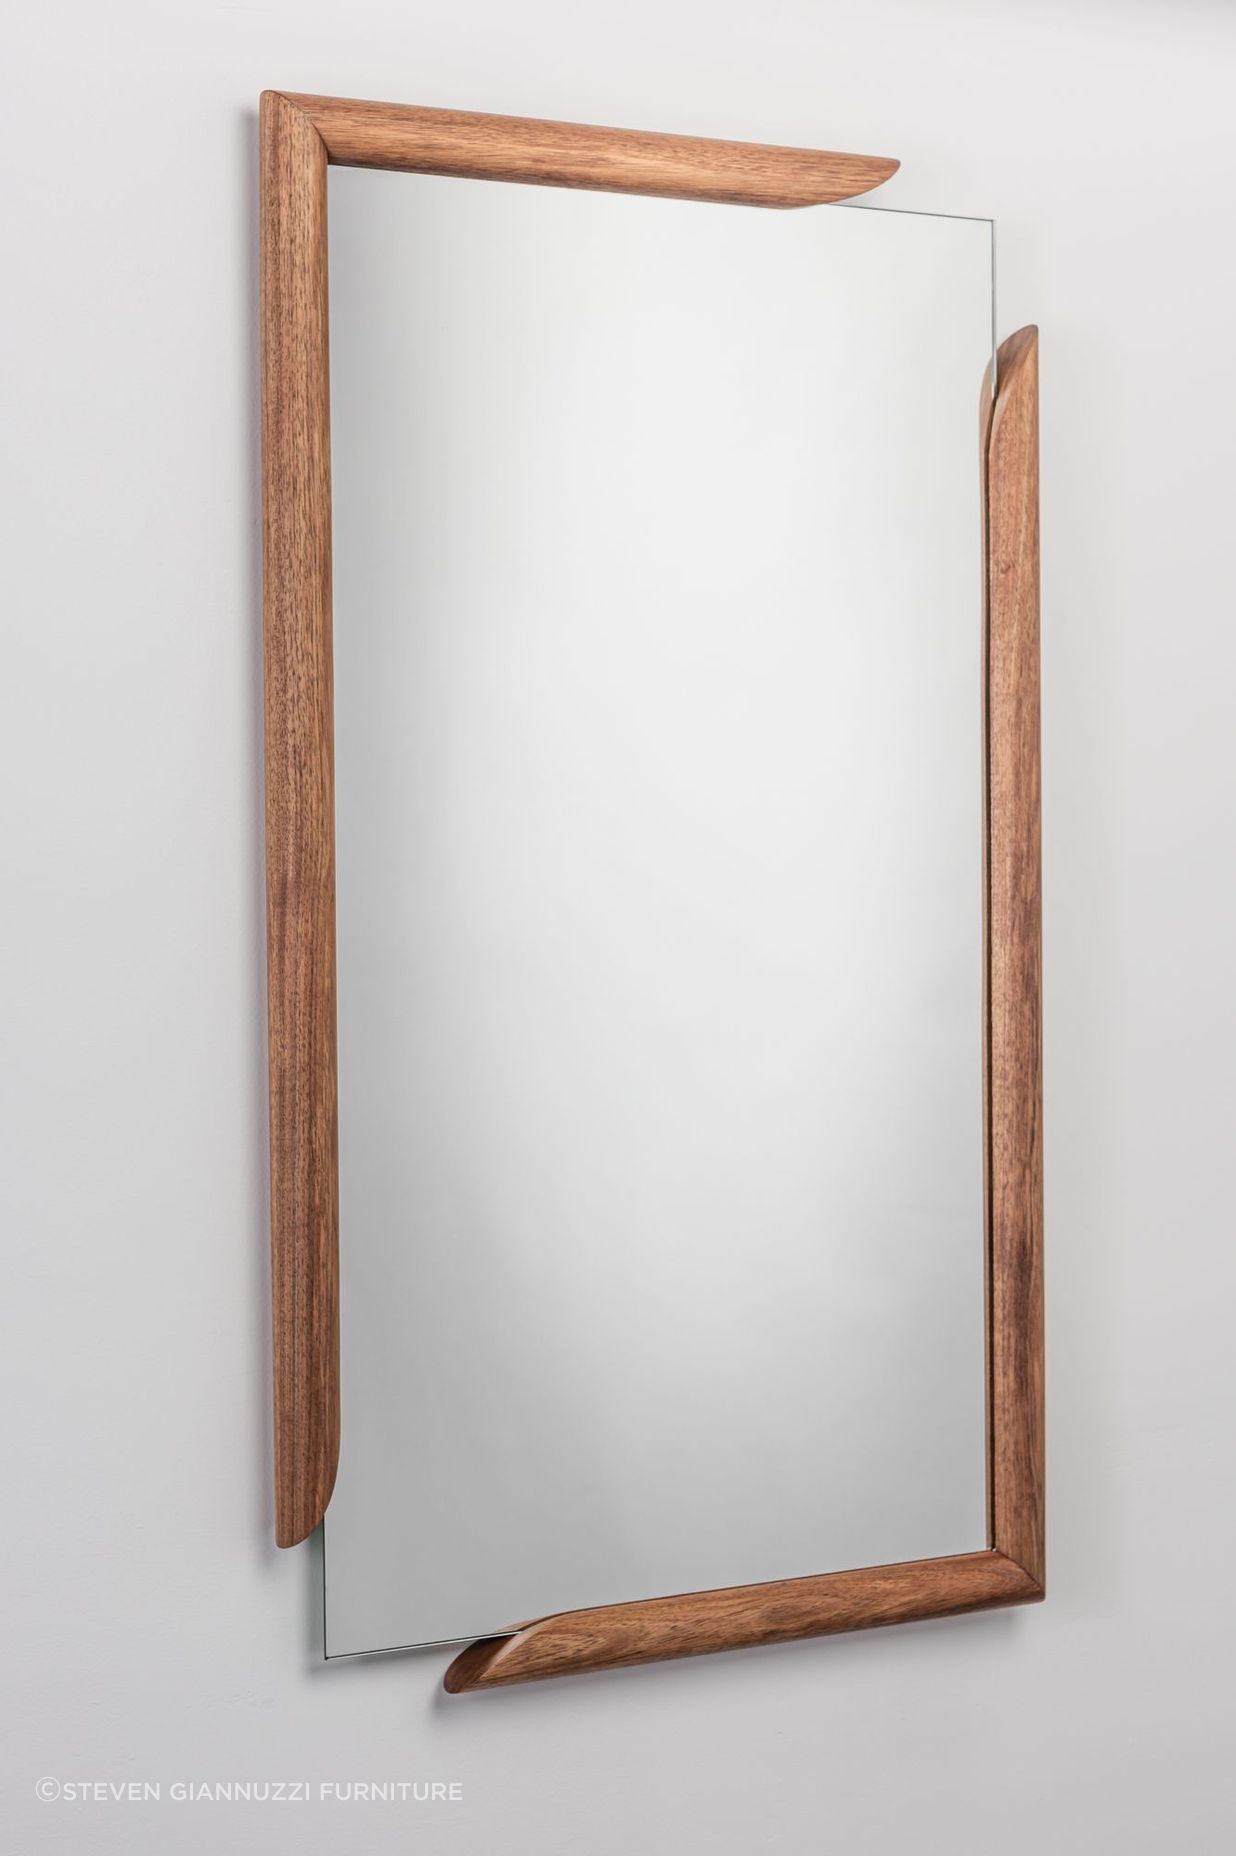 Four Corners? Wall Mirror from Steven Giannuzzi Furniture